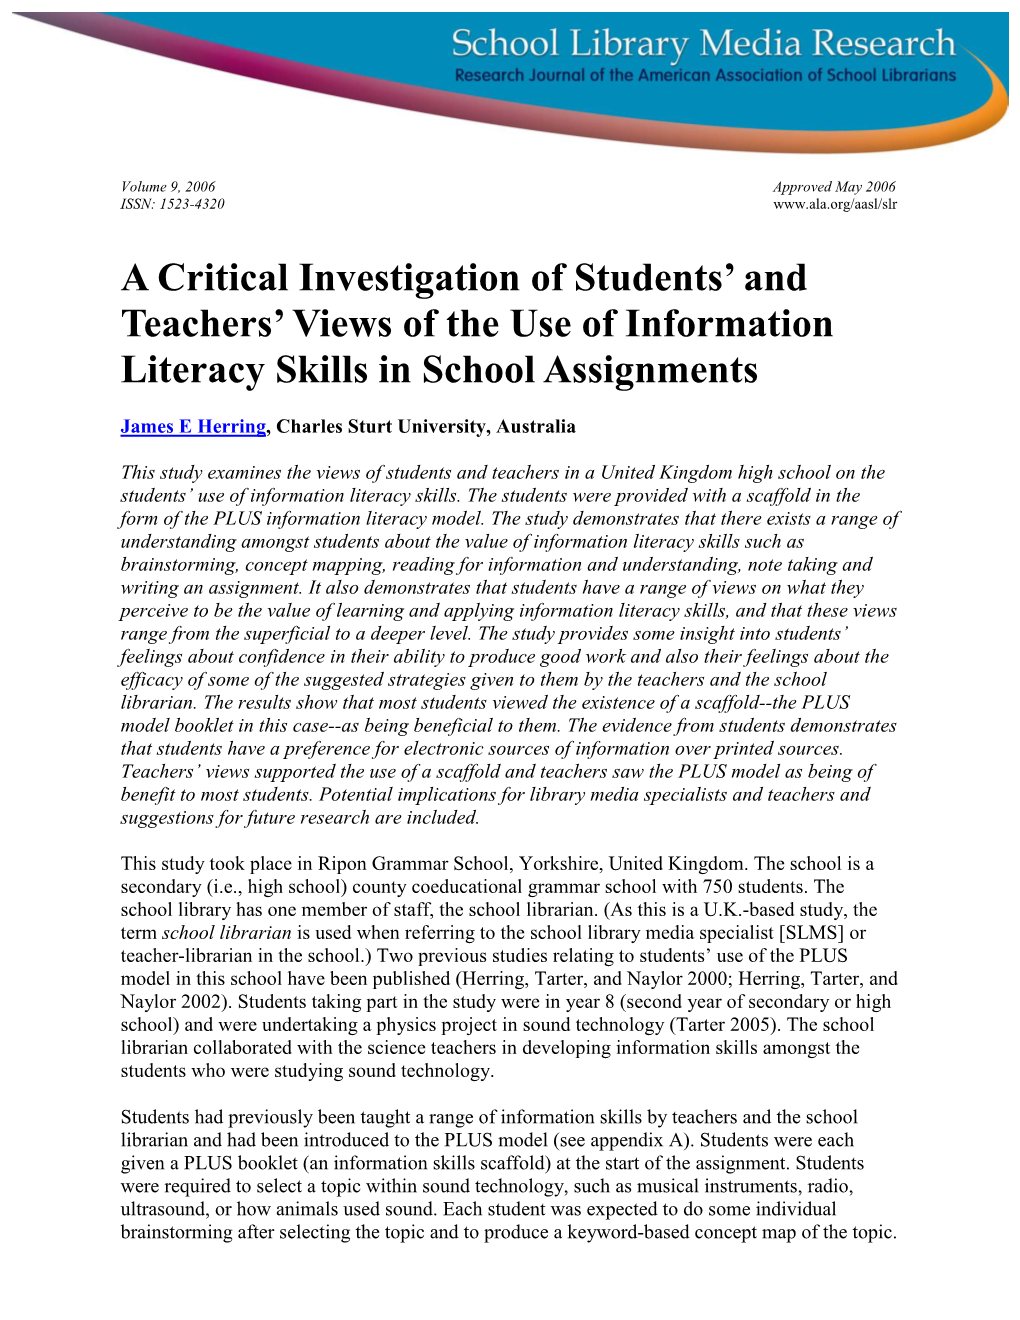 A Critical Investigation of Students' and Teachers' Views of the Use Of